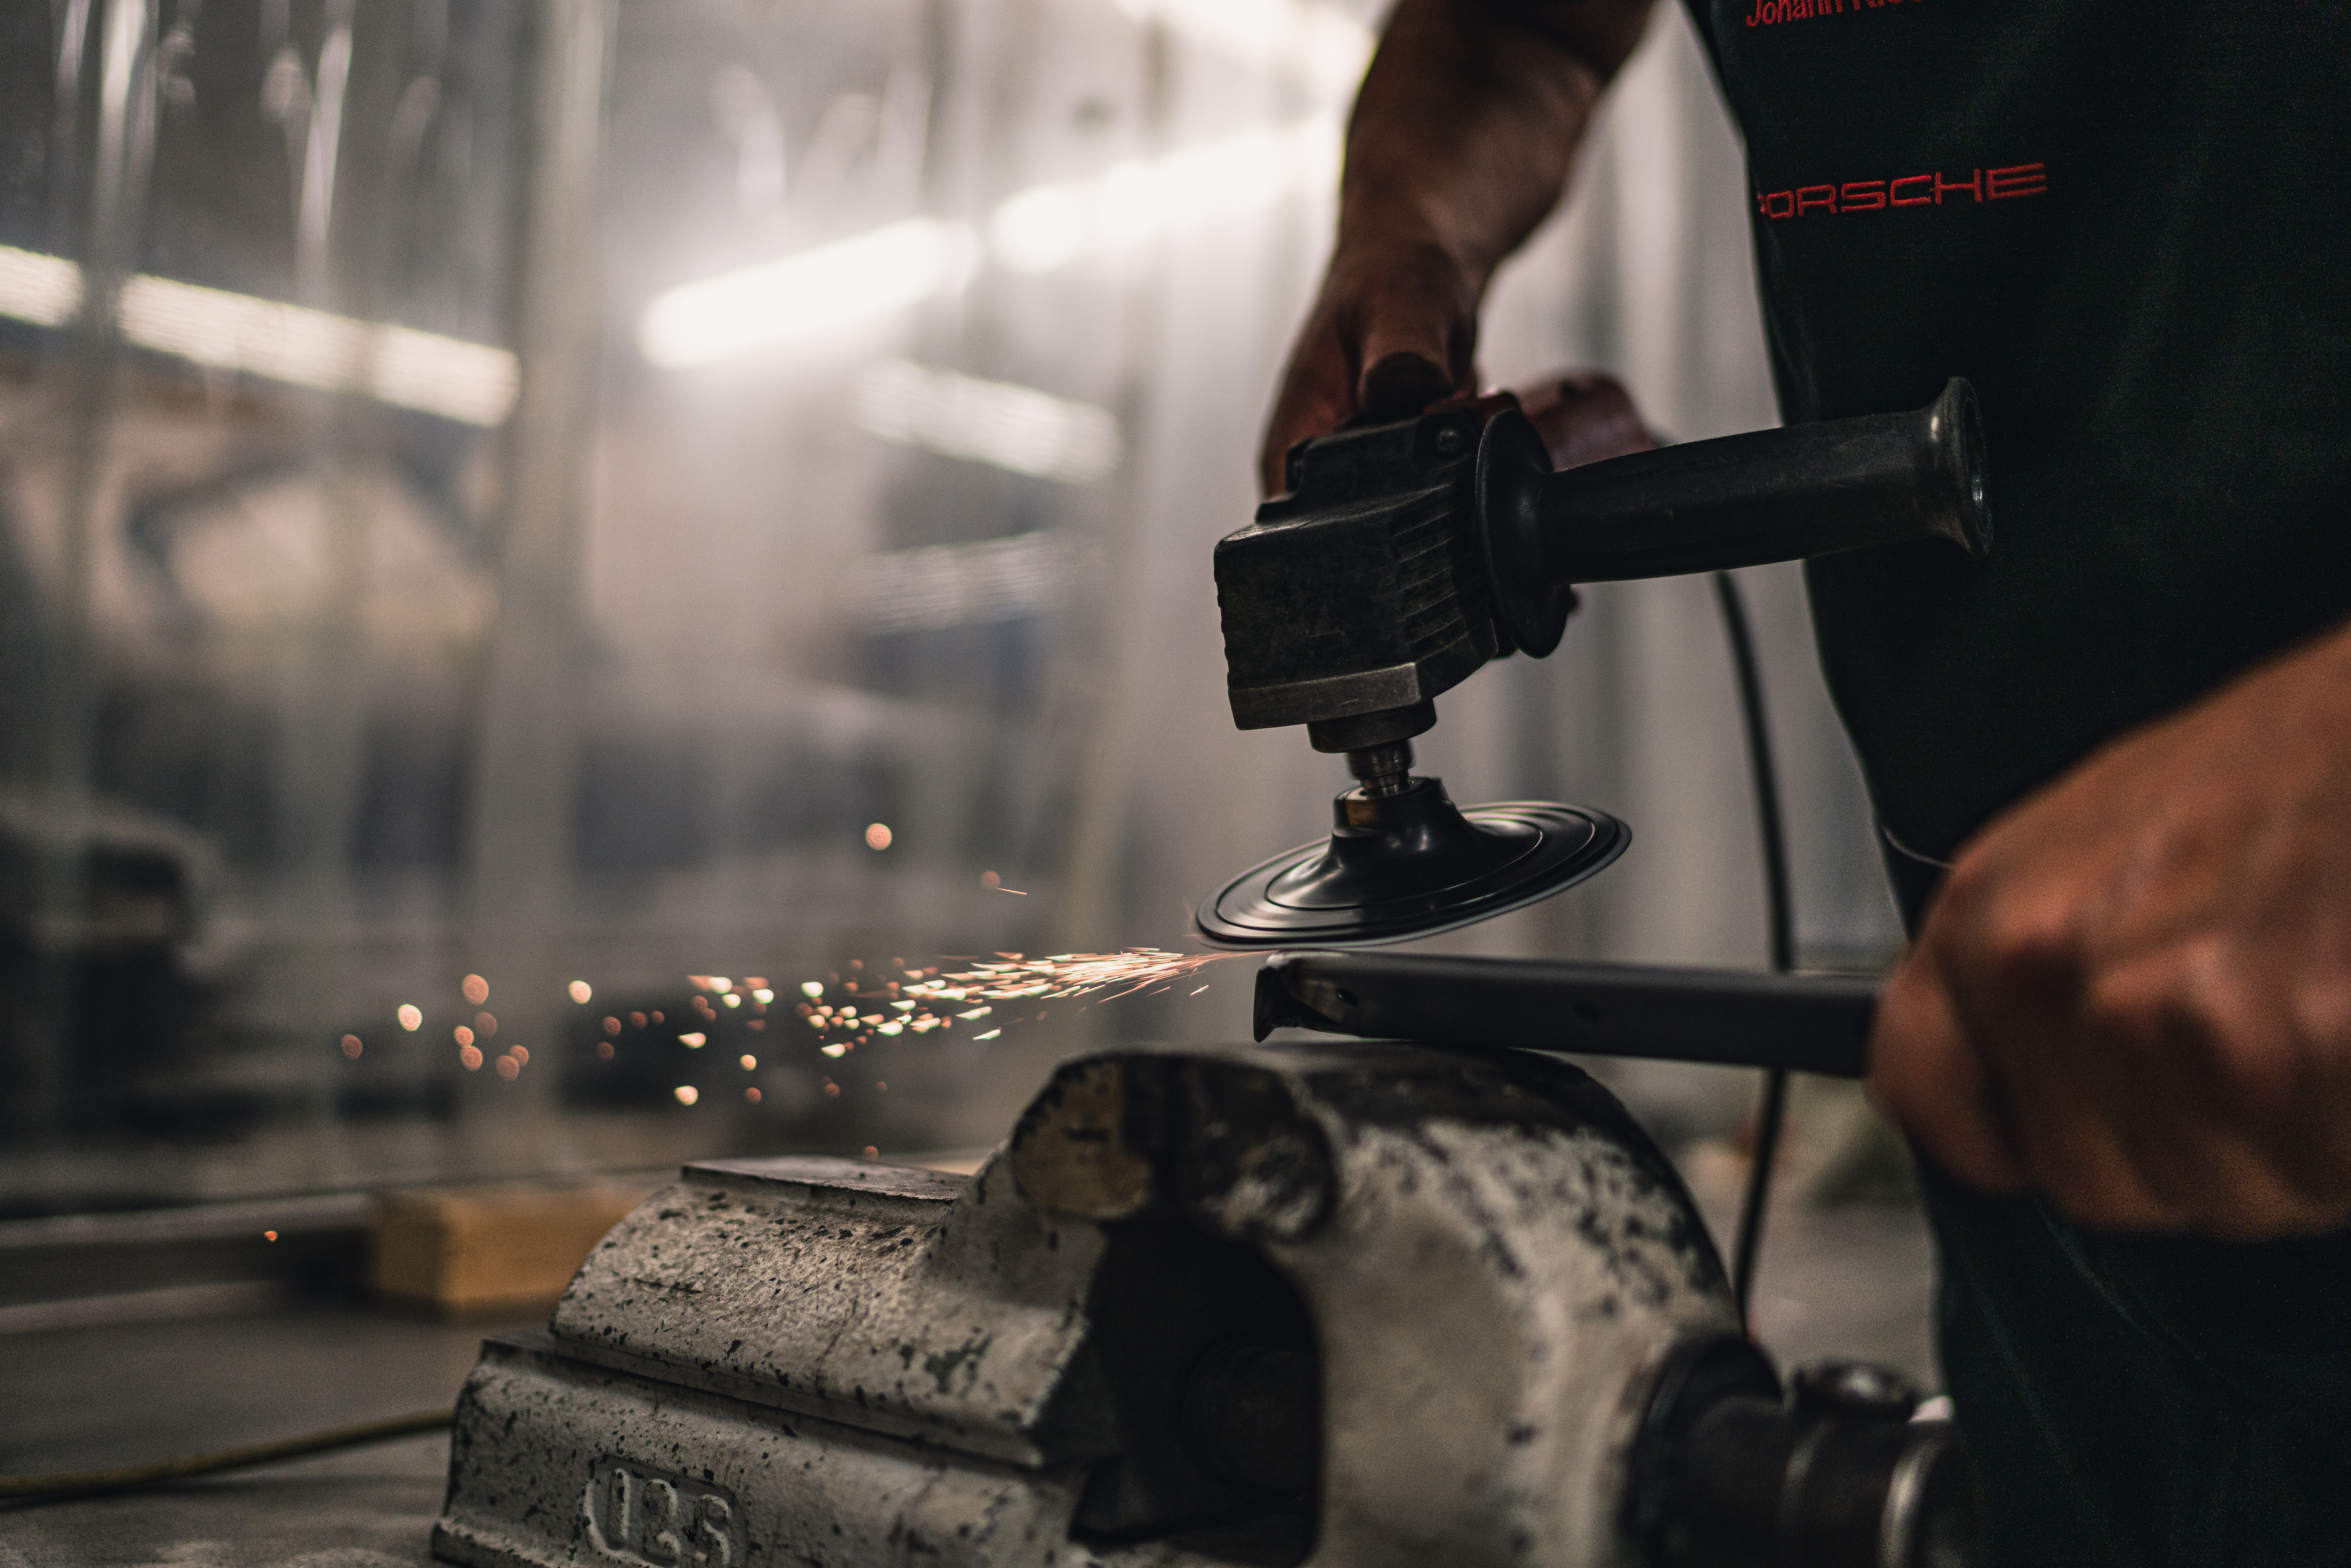 Person using angle grinder on metal bar in a workshop